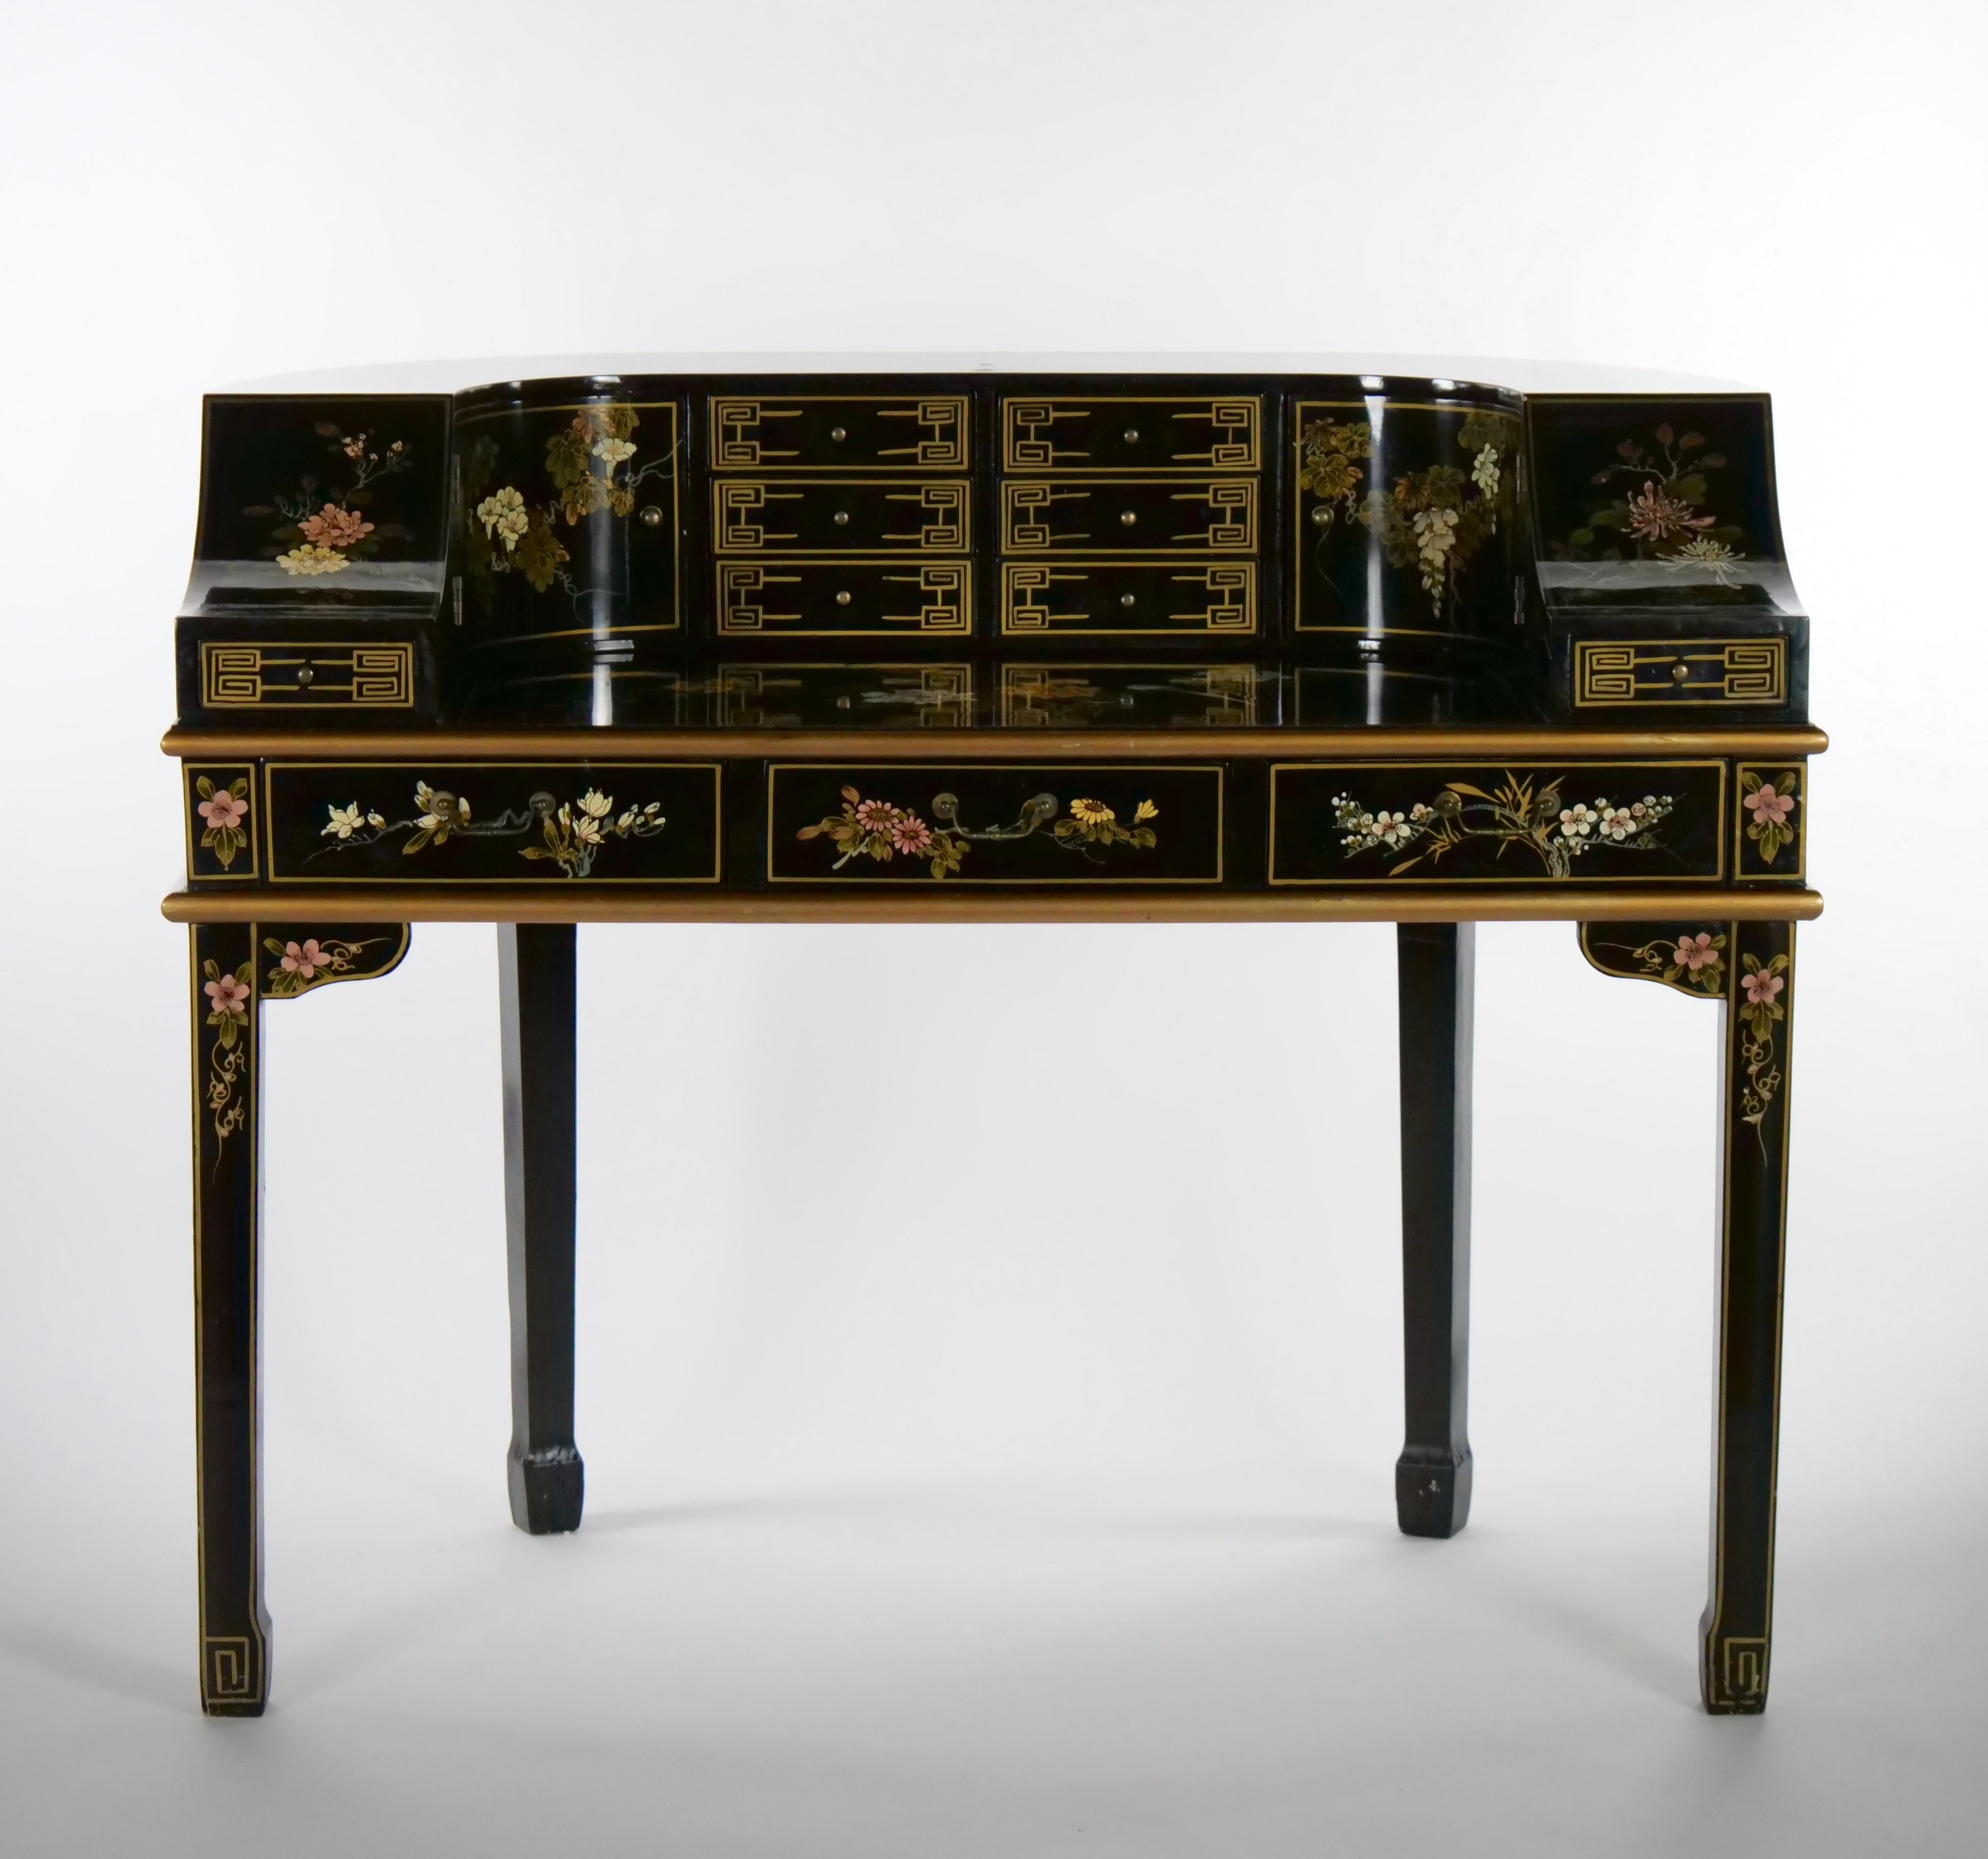 Black Lacquered Hand Painted / Decorated Chinoiserie Desk 14